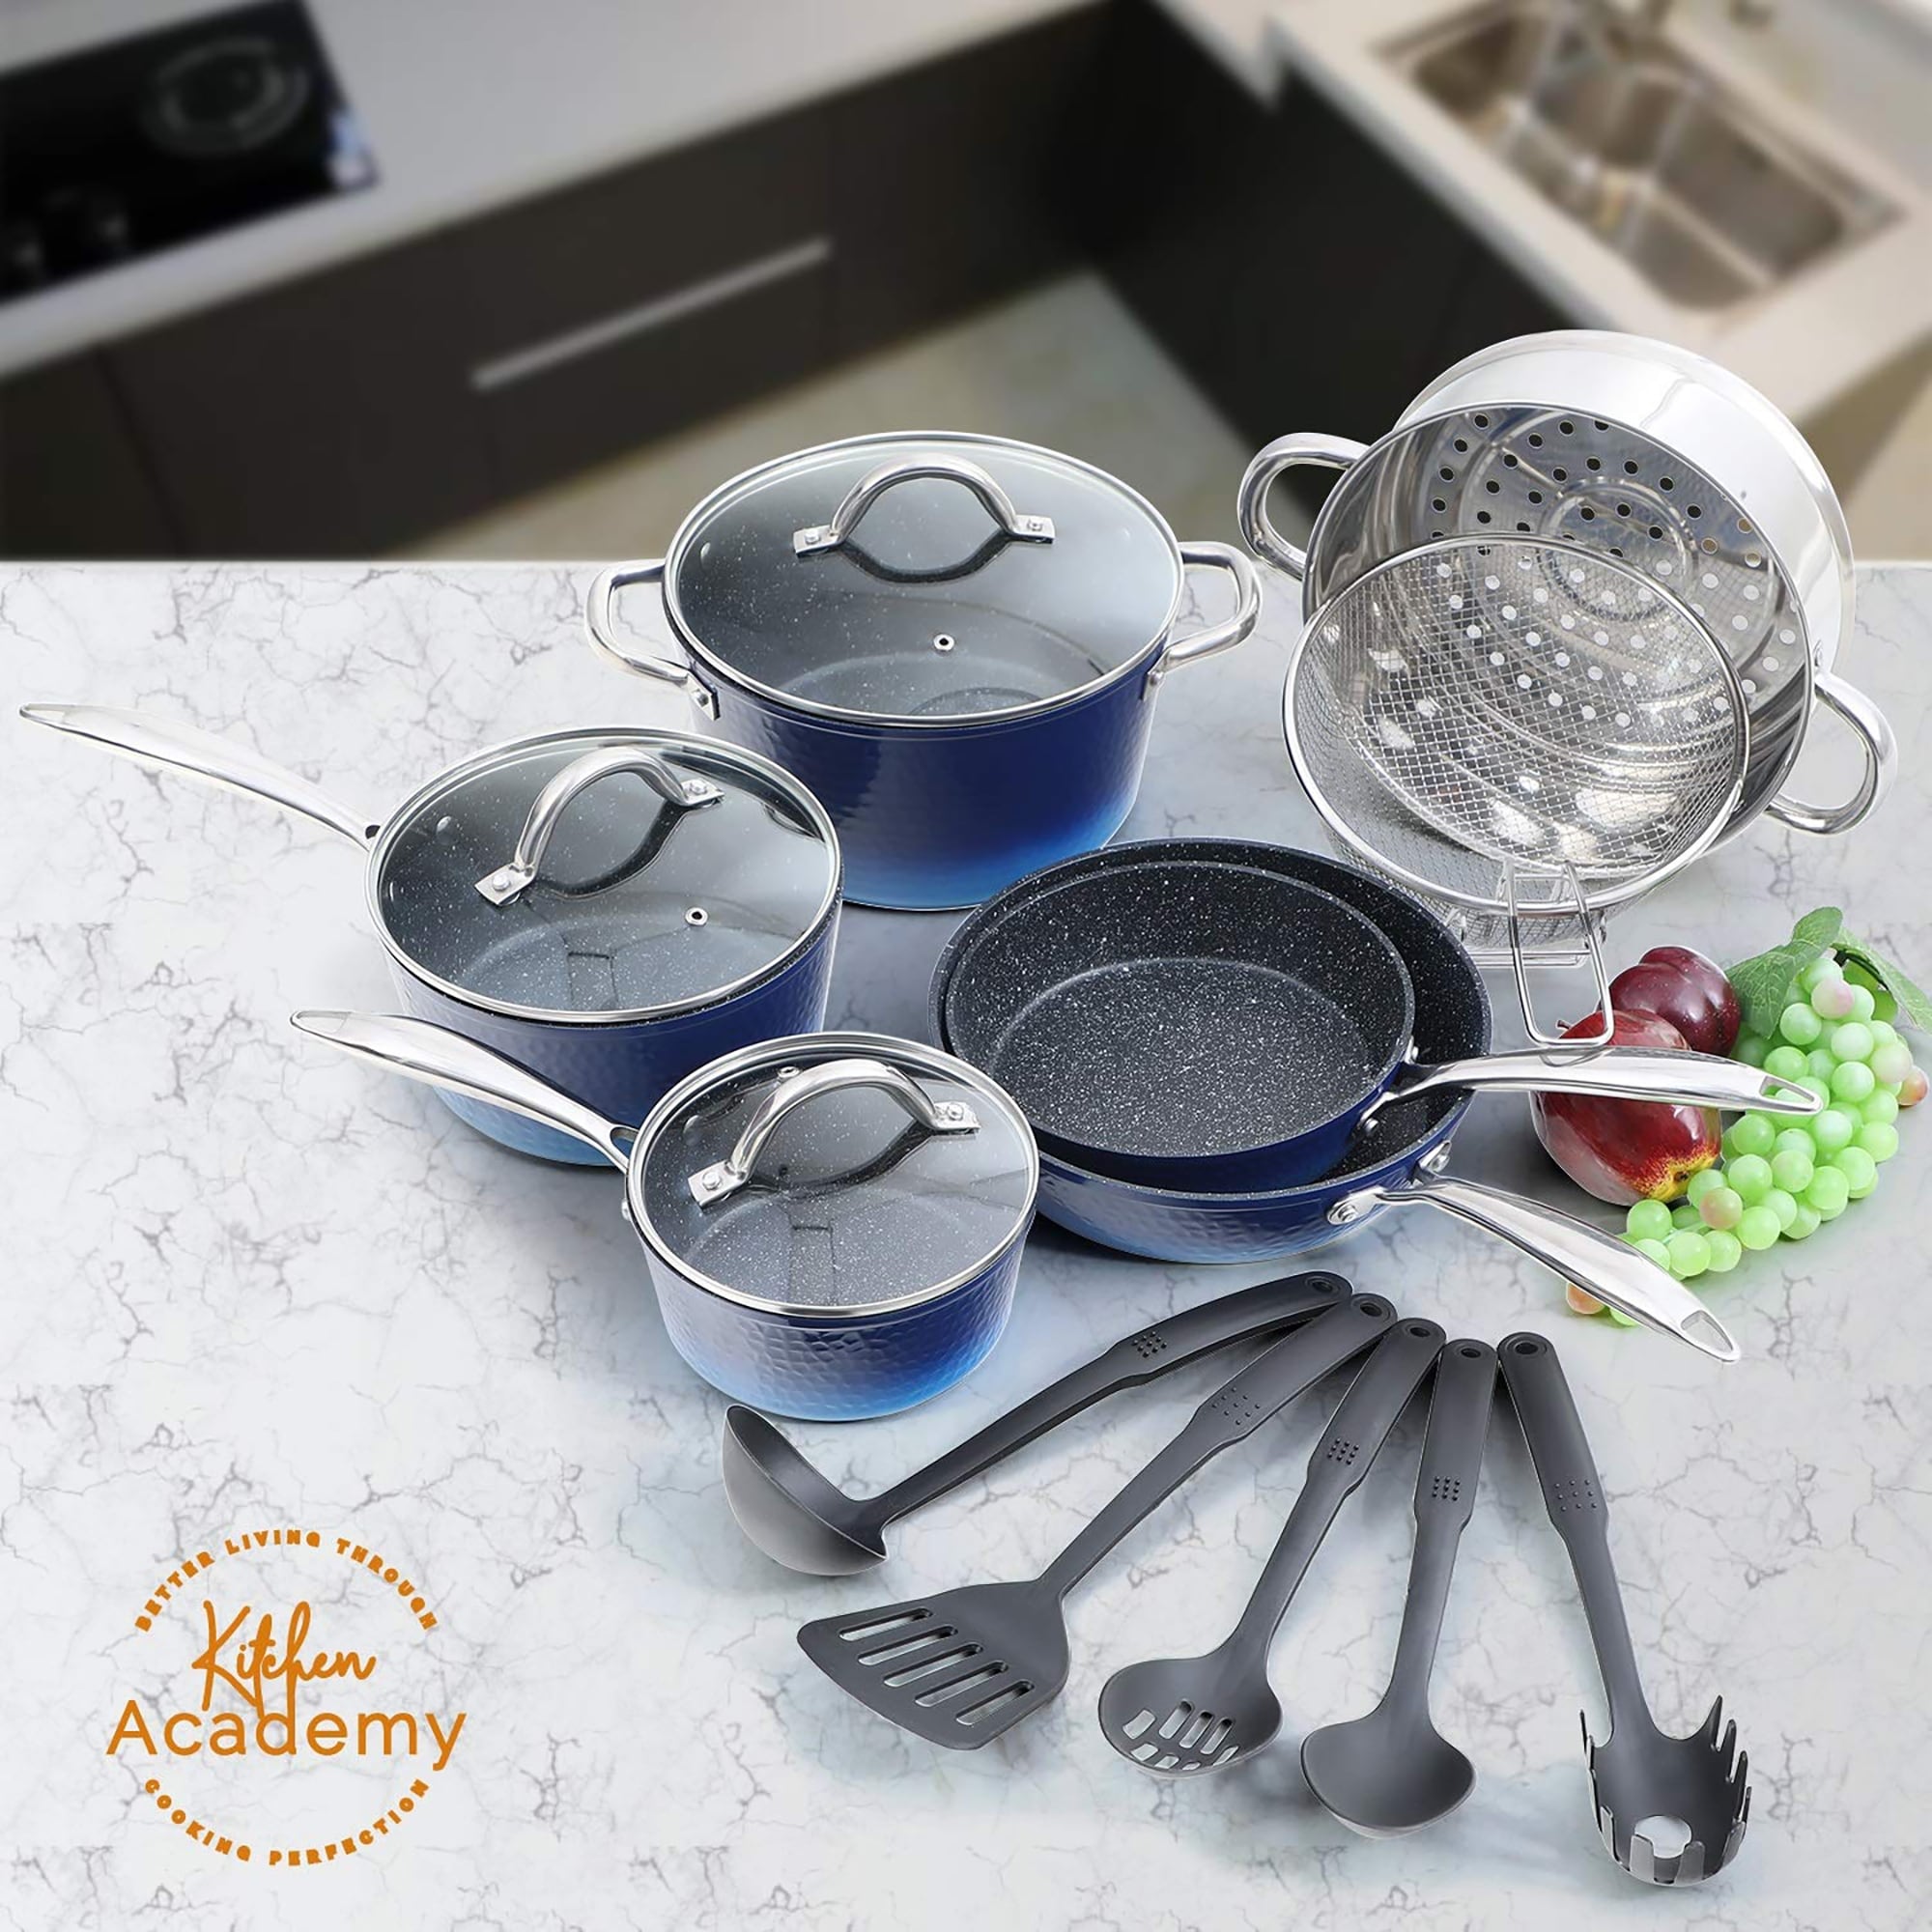 https://ak1.ostkcdn.com/images/products/is/images/direct/49fcd1196fbdc2b924b7399d5b45b1ab46a78bbc/Kitchen-Academy-Nonstick-Granite-Coated-12-15-piece-Cookware-Set.jpg